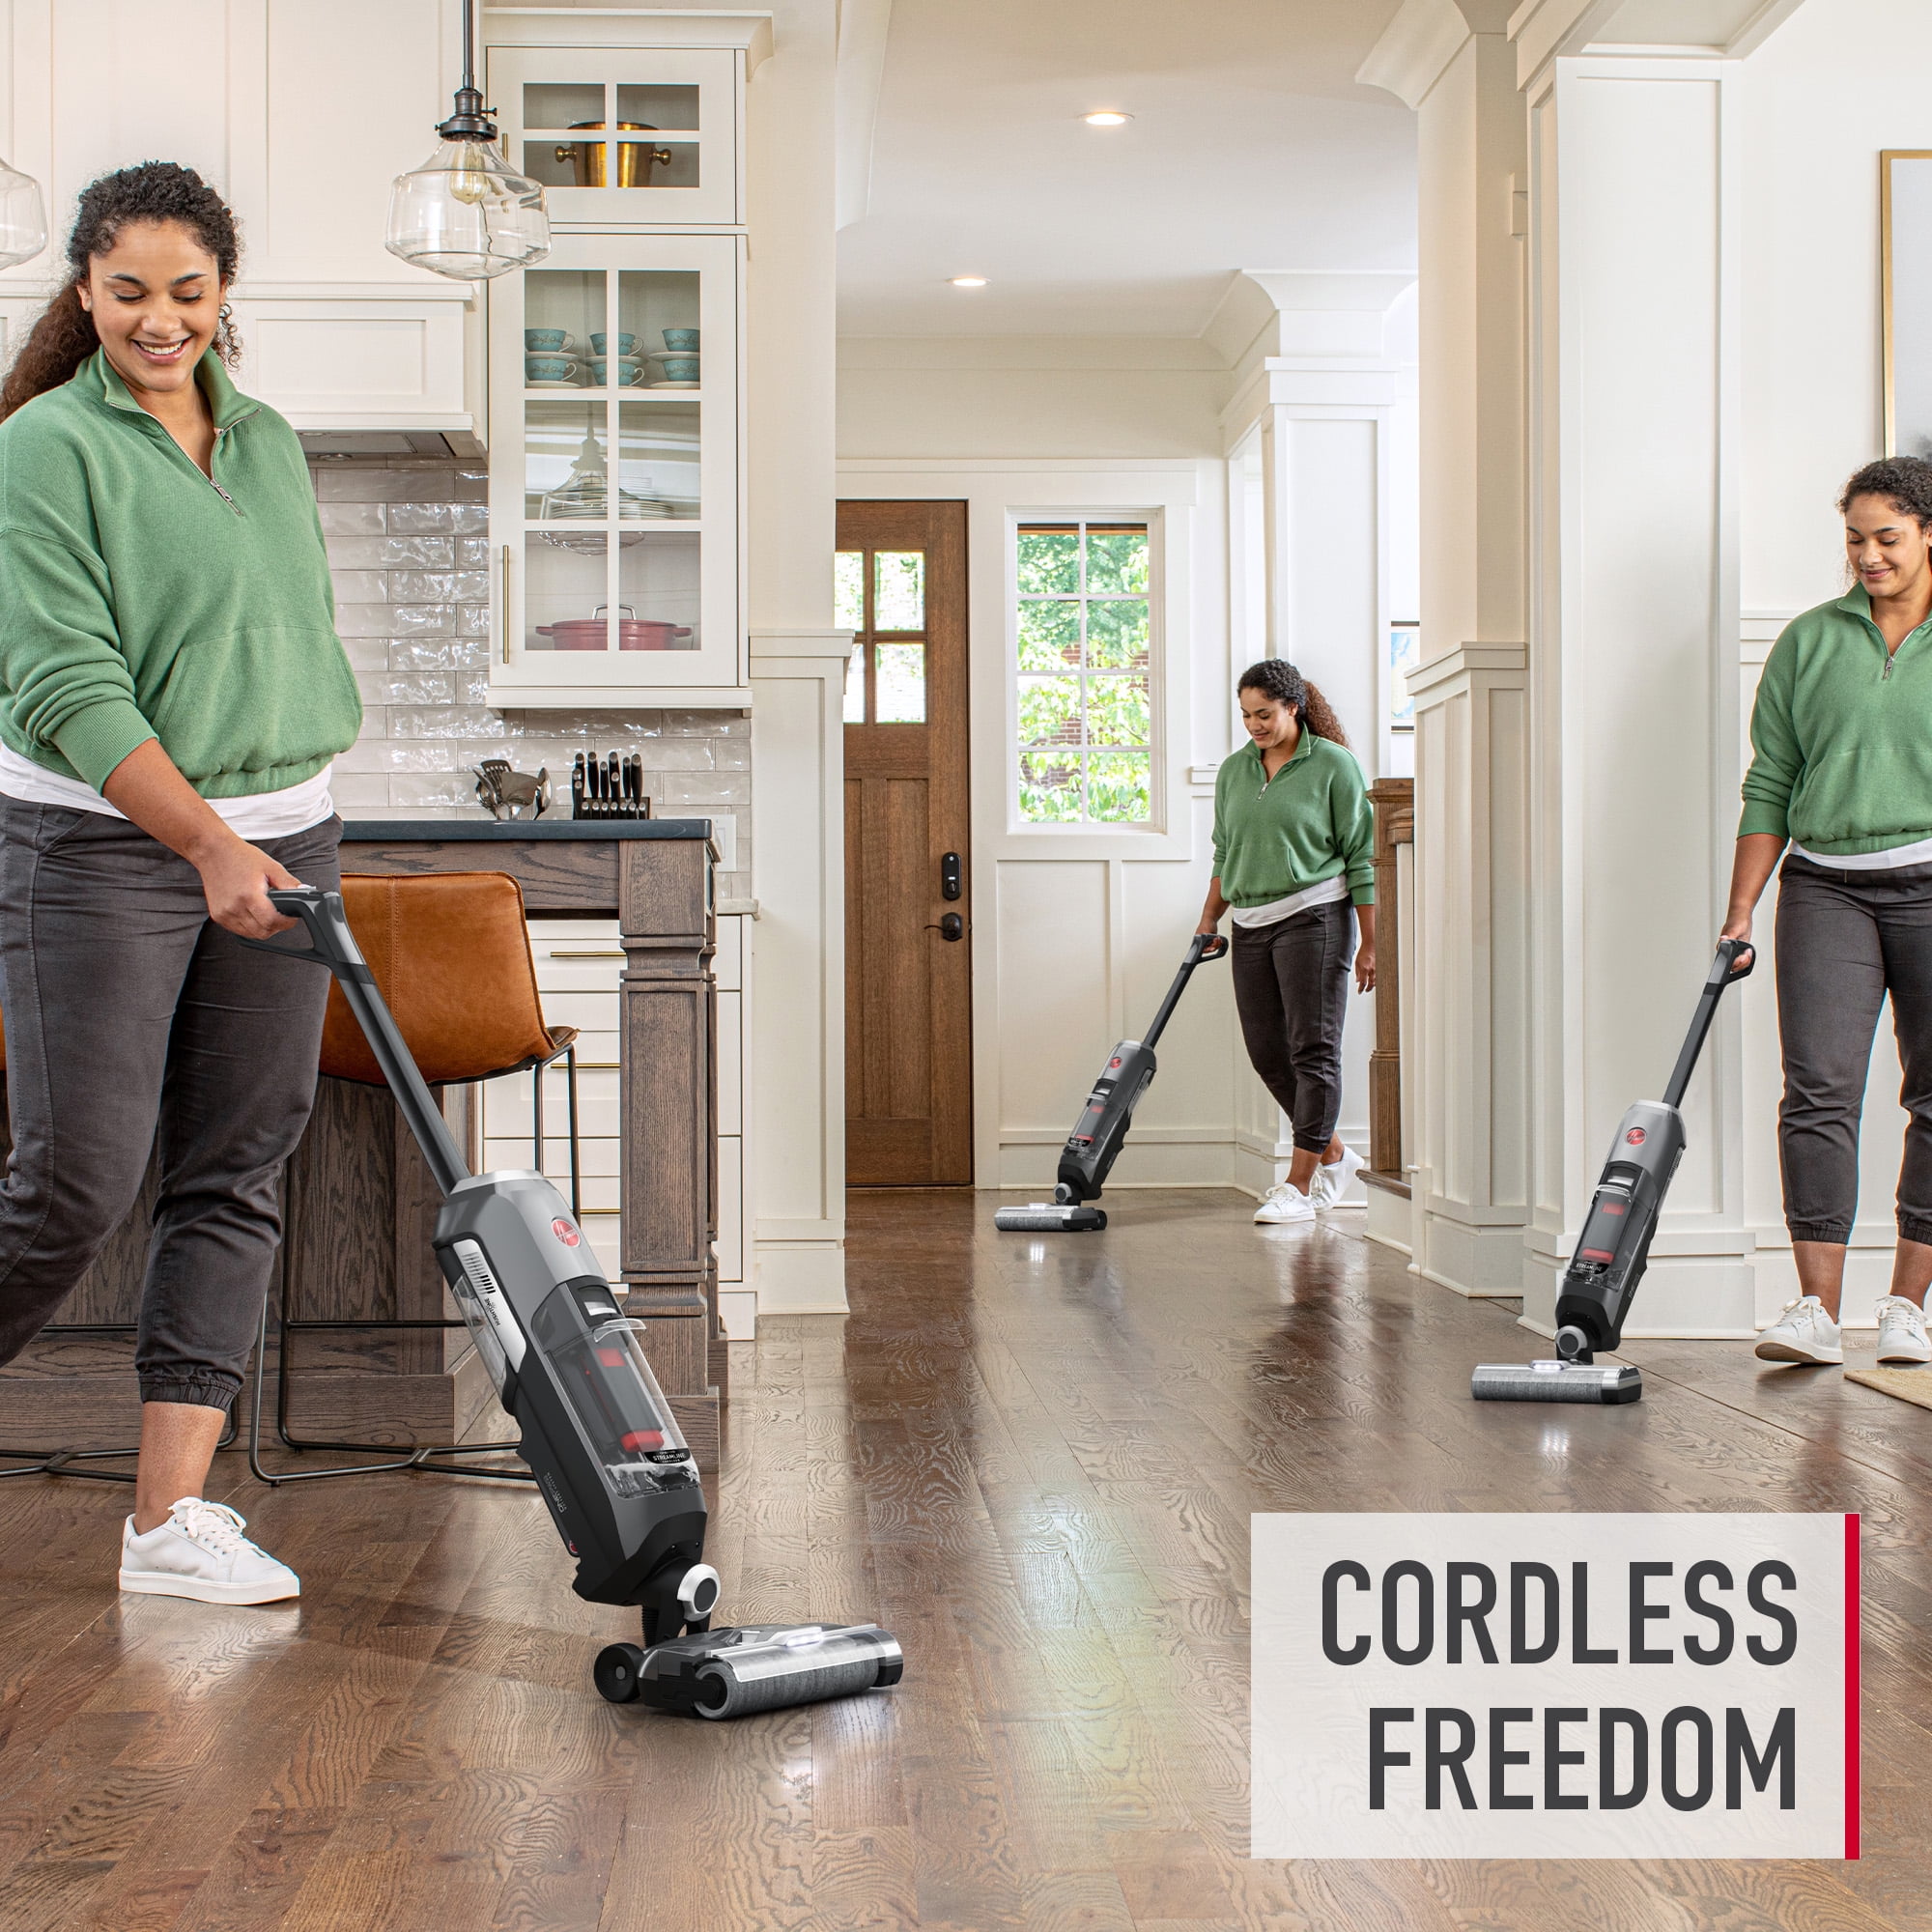 Hoover Streamline Corded Hard Floor Cleaner, Wet Dry Vacuum with Self  Cleaning System, Edge Cleaning, LCD Display, FH46000V, Silver